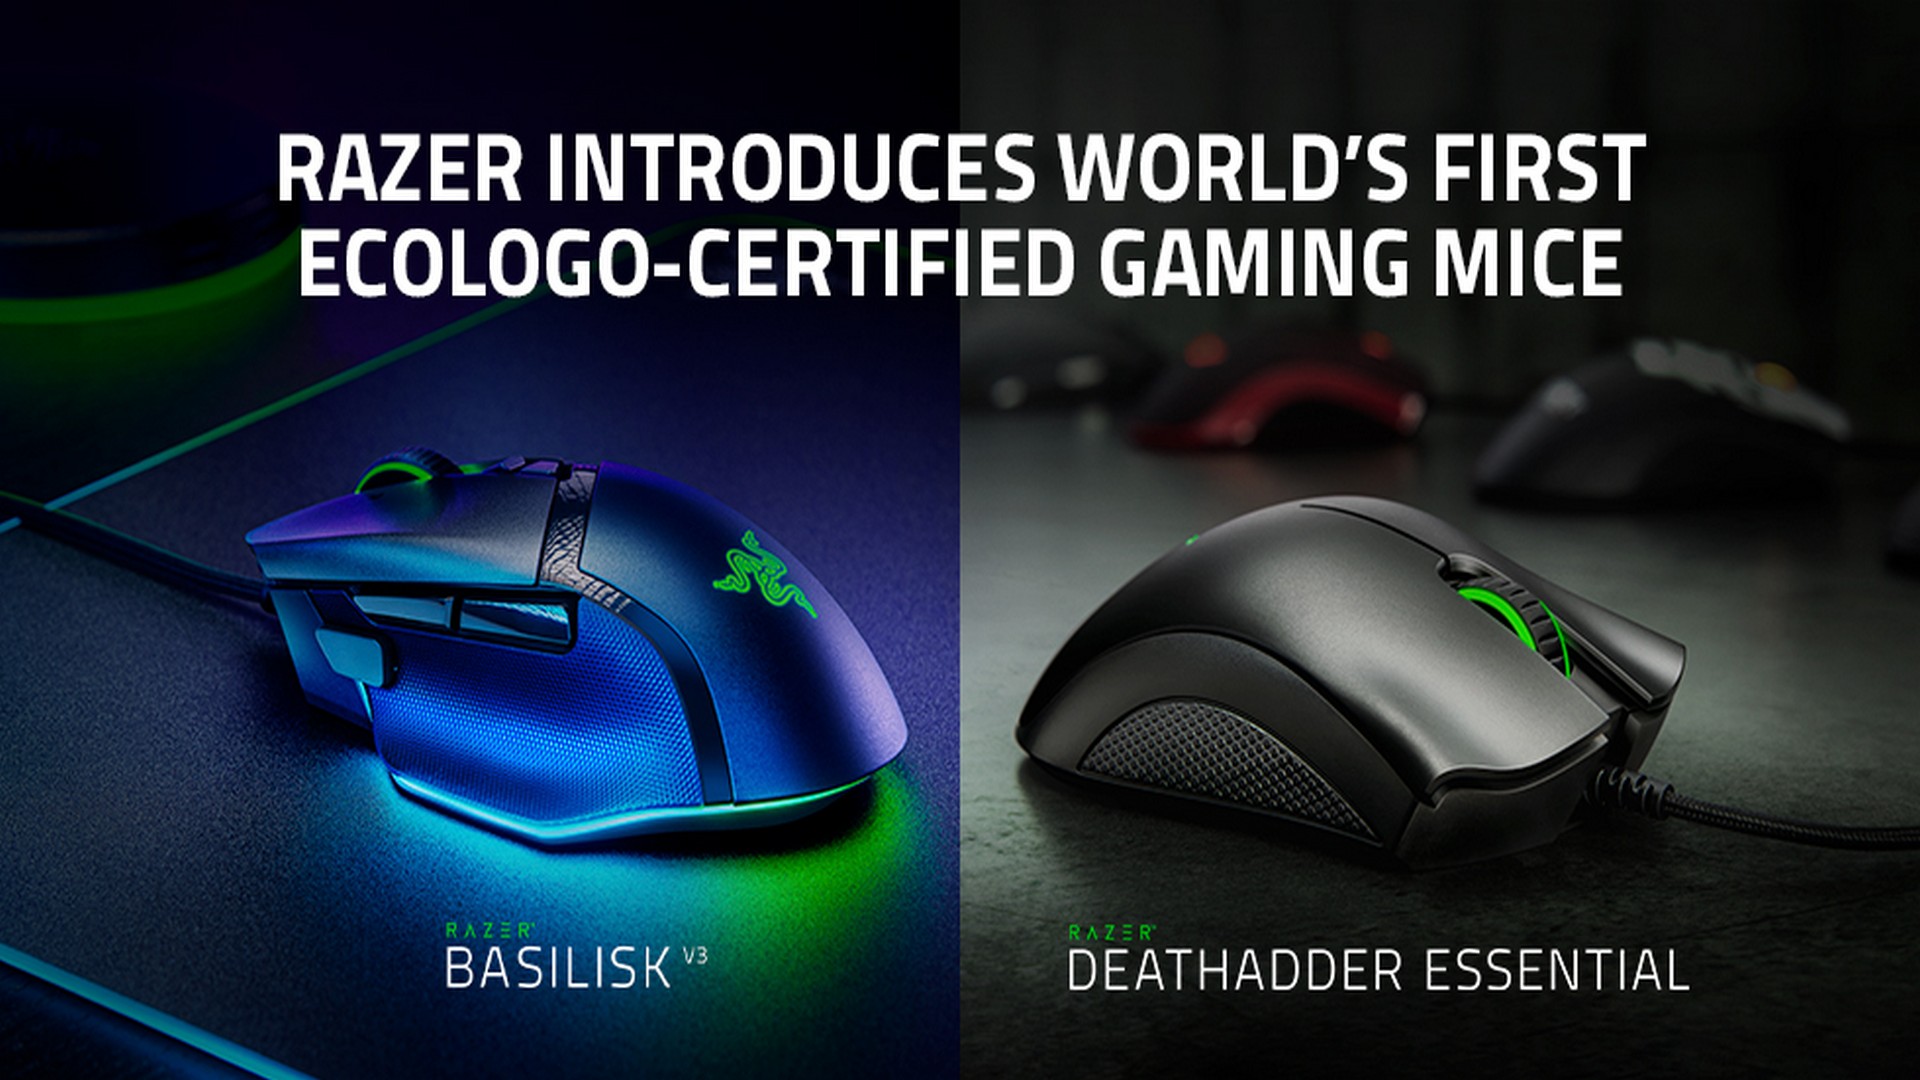 Razer Celebrates World Environment Day By Announcing World’s First Ecologo-Certified Gaming Mice